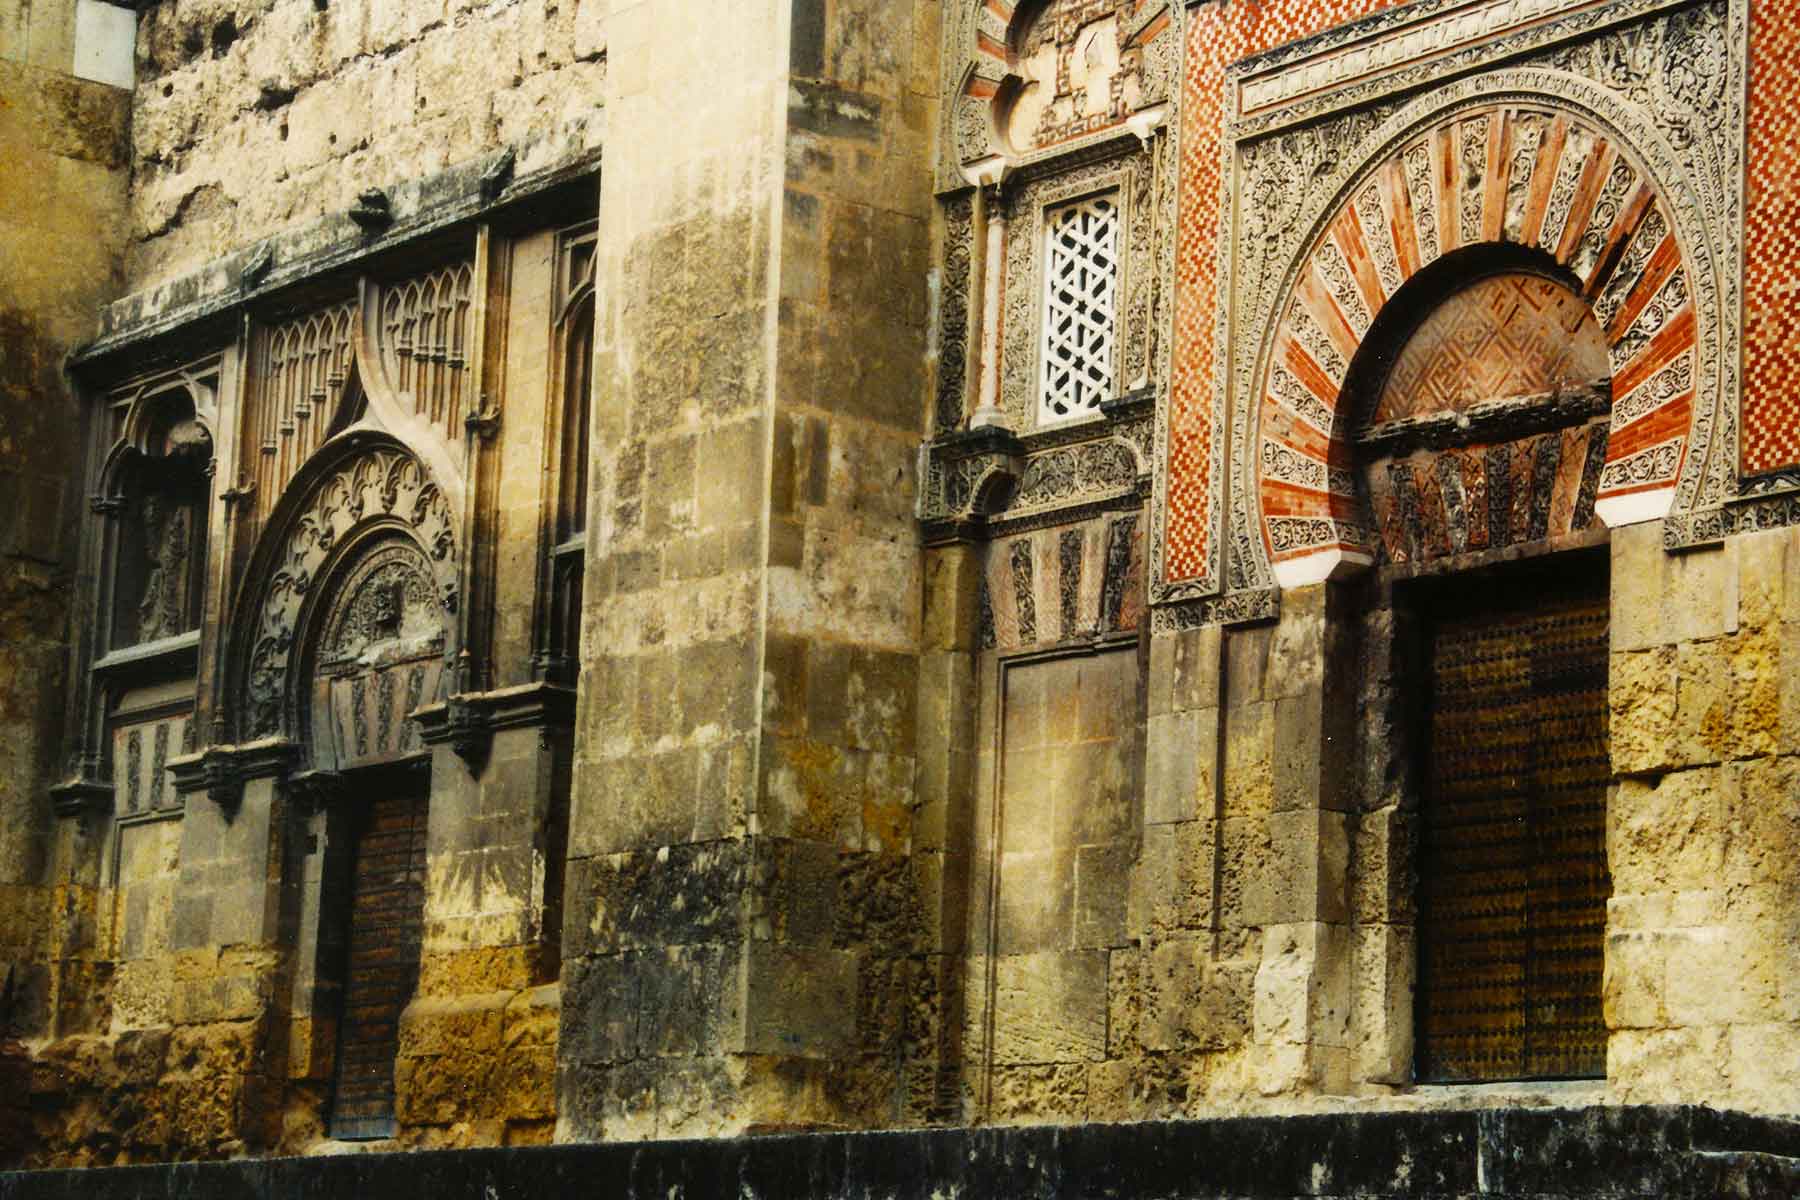 Great Mosque Cordoba - Spain Photo Journal - Surf Doctor Steven Andrew Martin - Study Abroad 1998